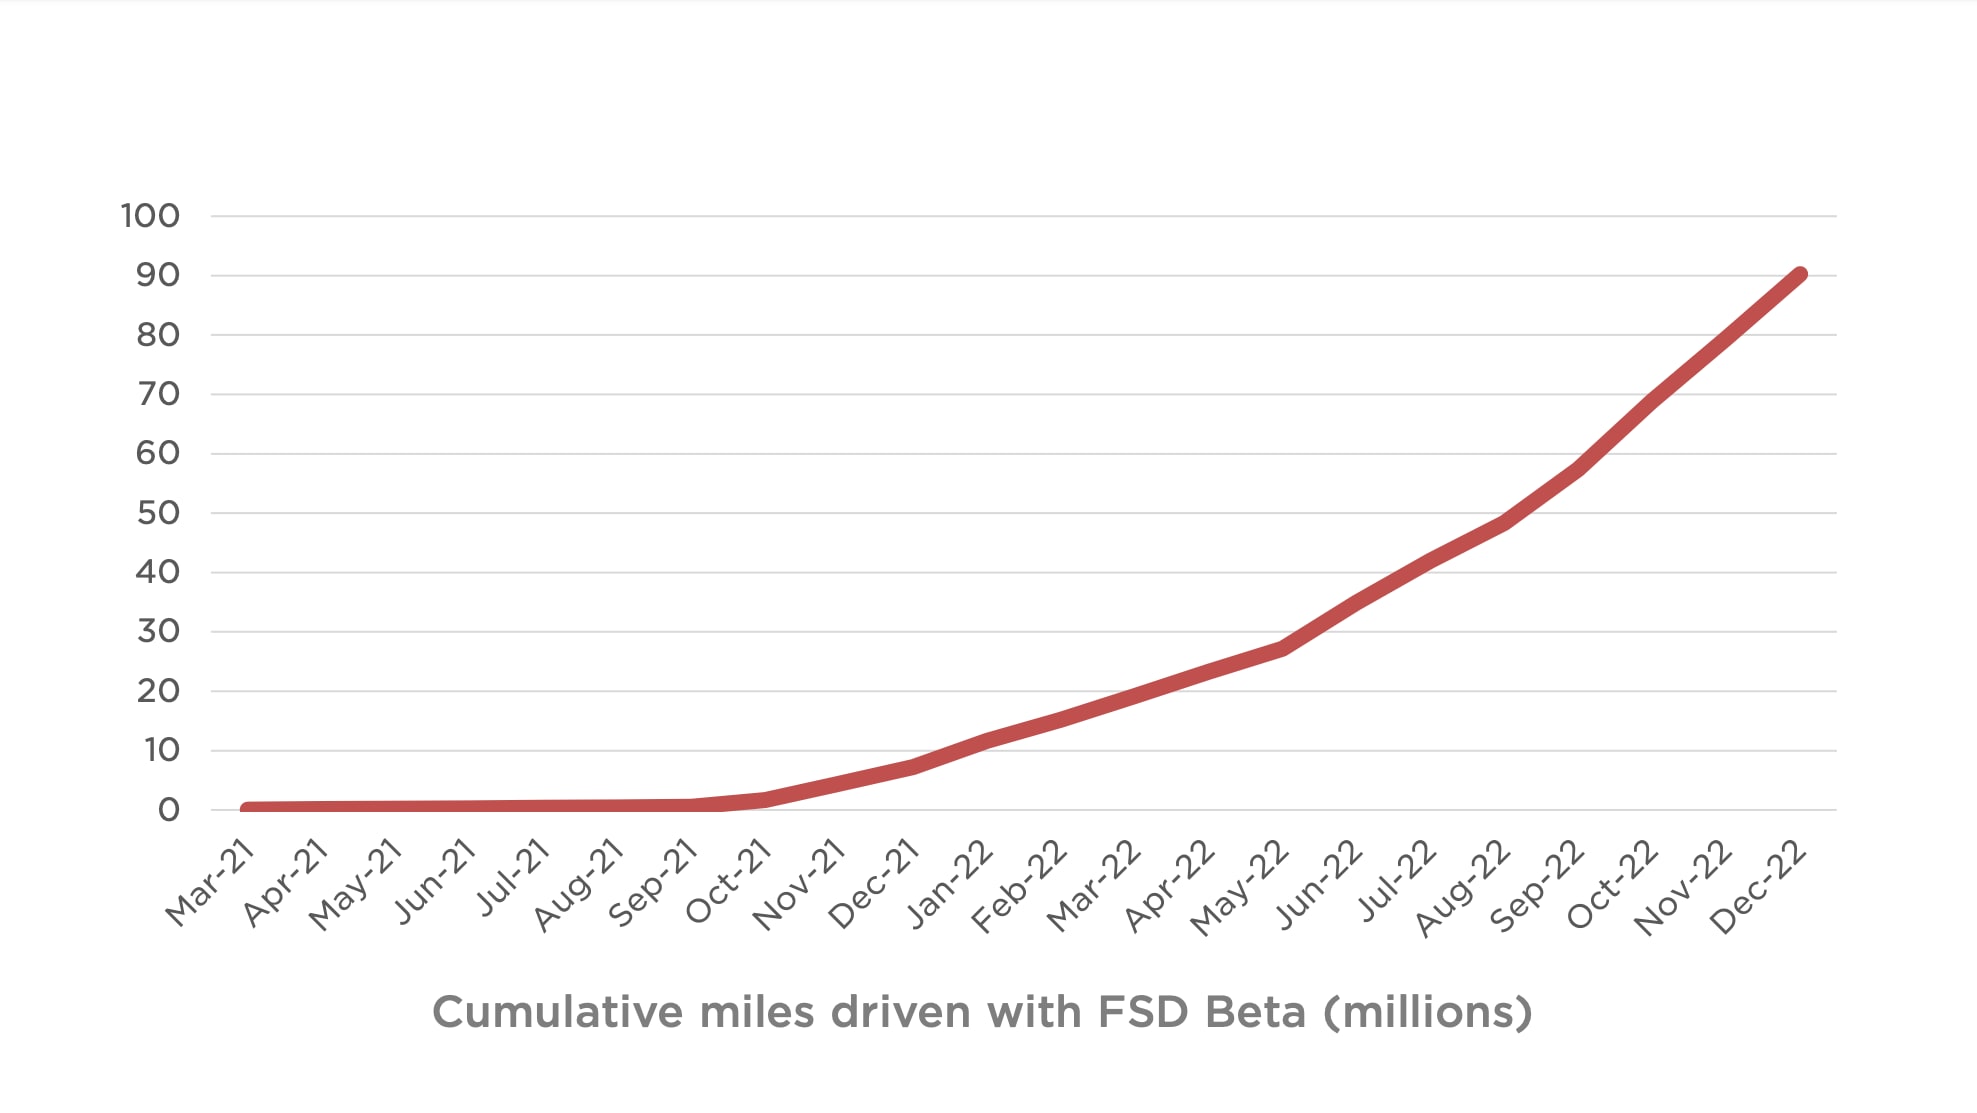 Tesla reveals how many miles have been driven on FSD Beta as of January 2023